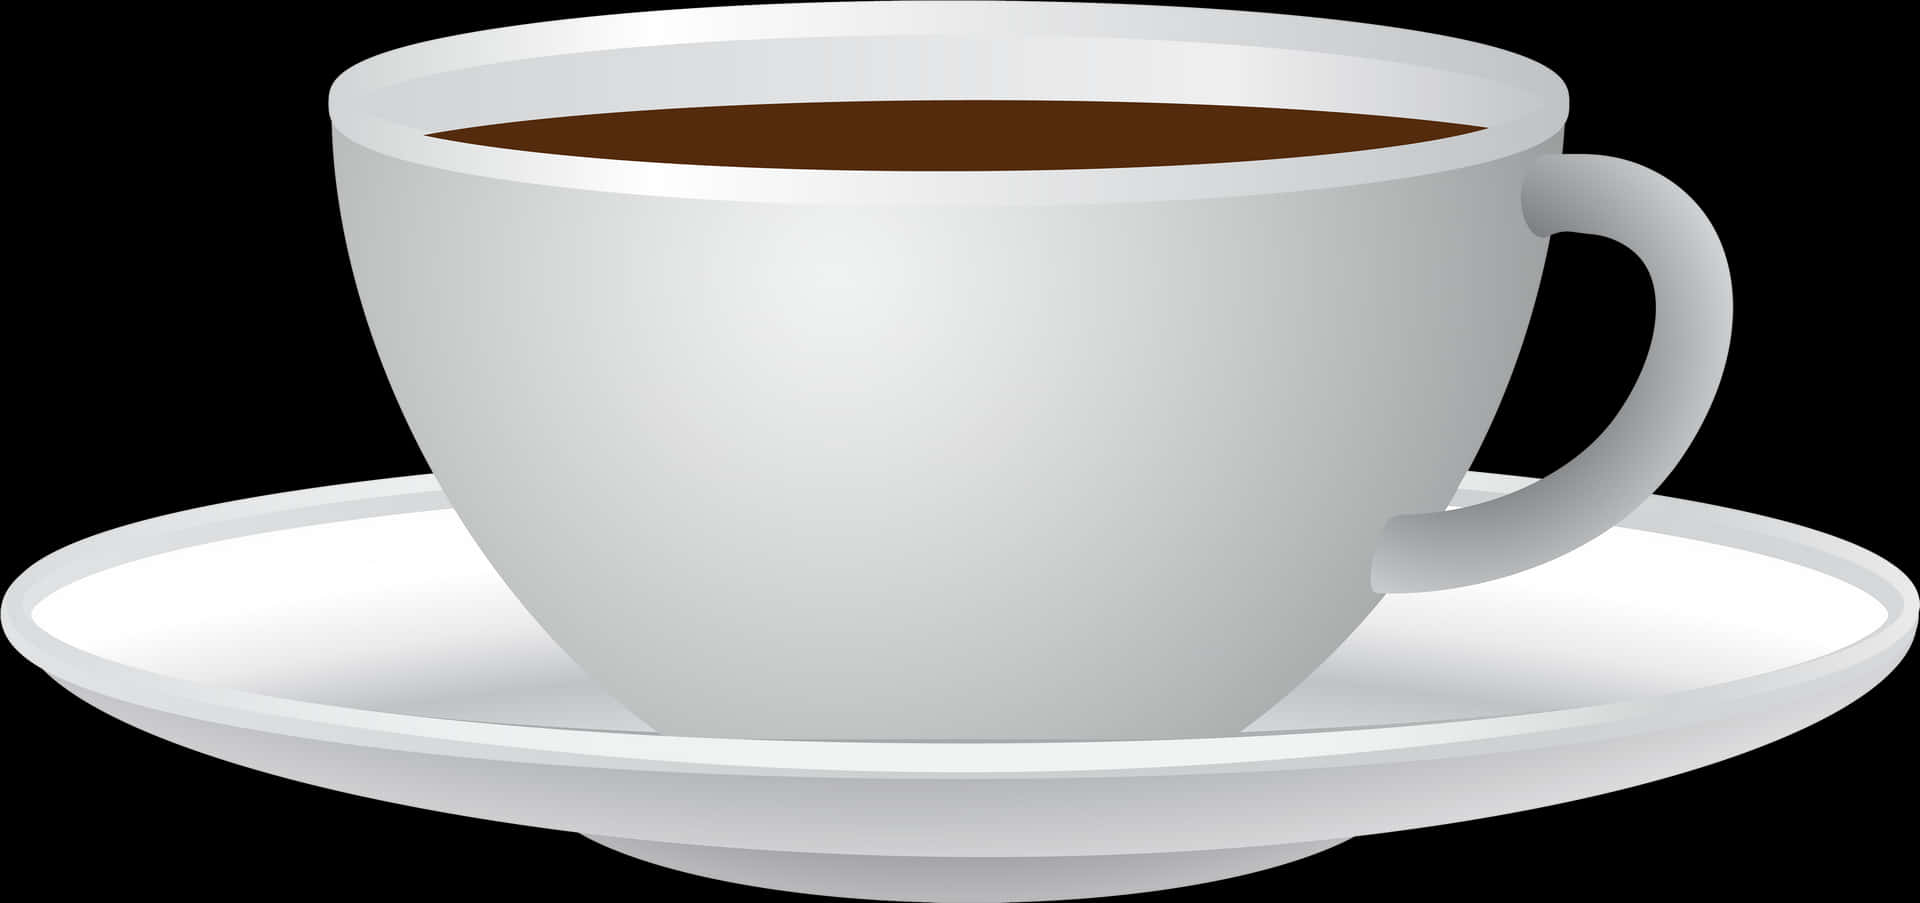 Classic Coffee Cupon Saucer PNG